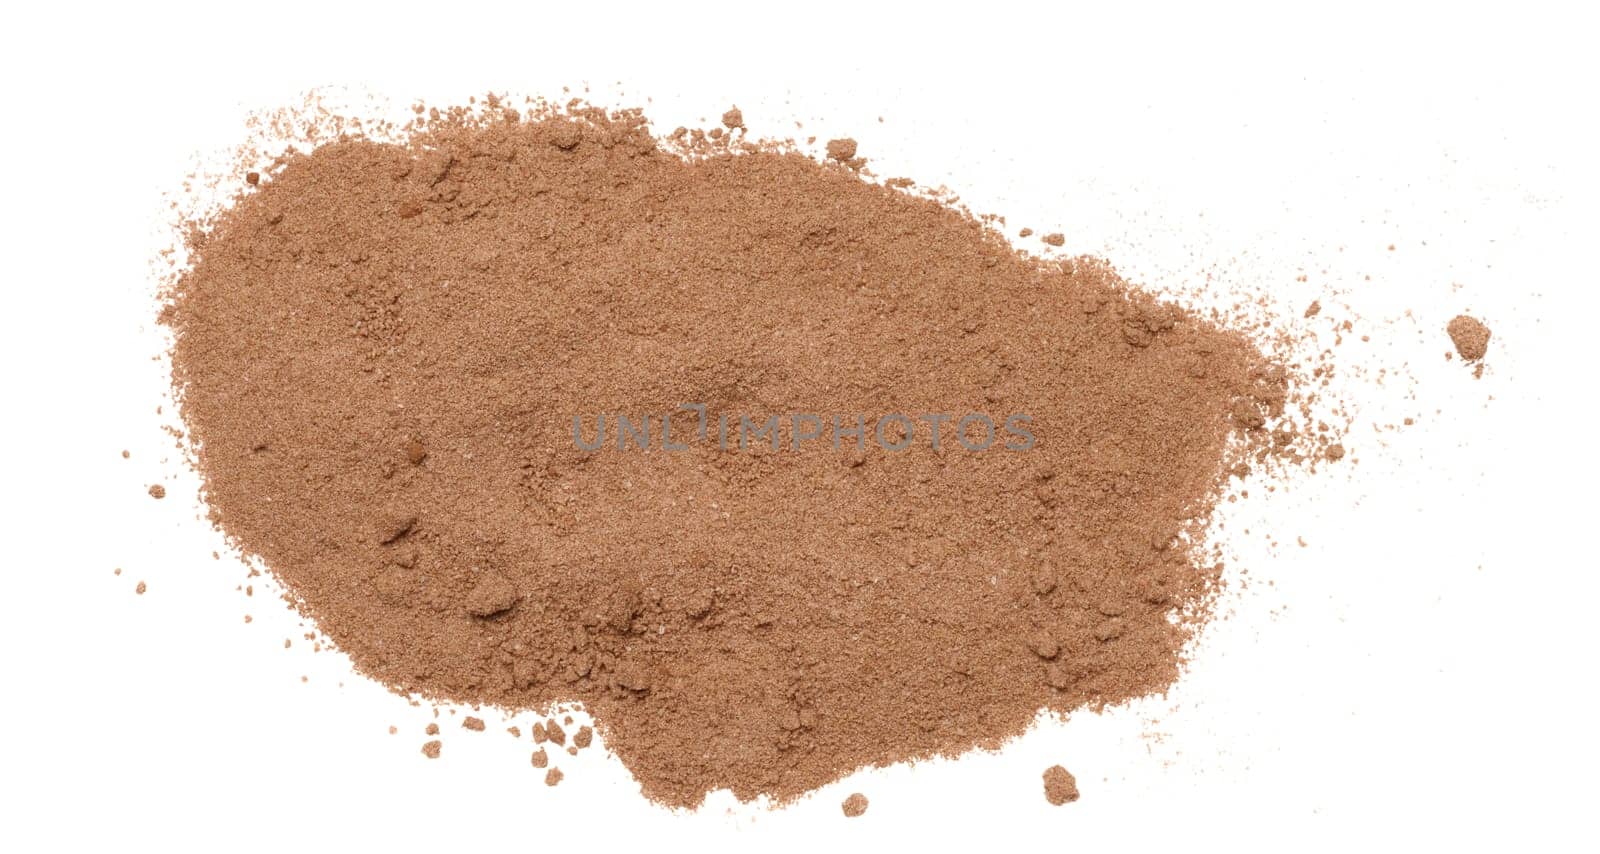 Dry ground cocoa powder scattered on an isolated background, close up